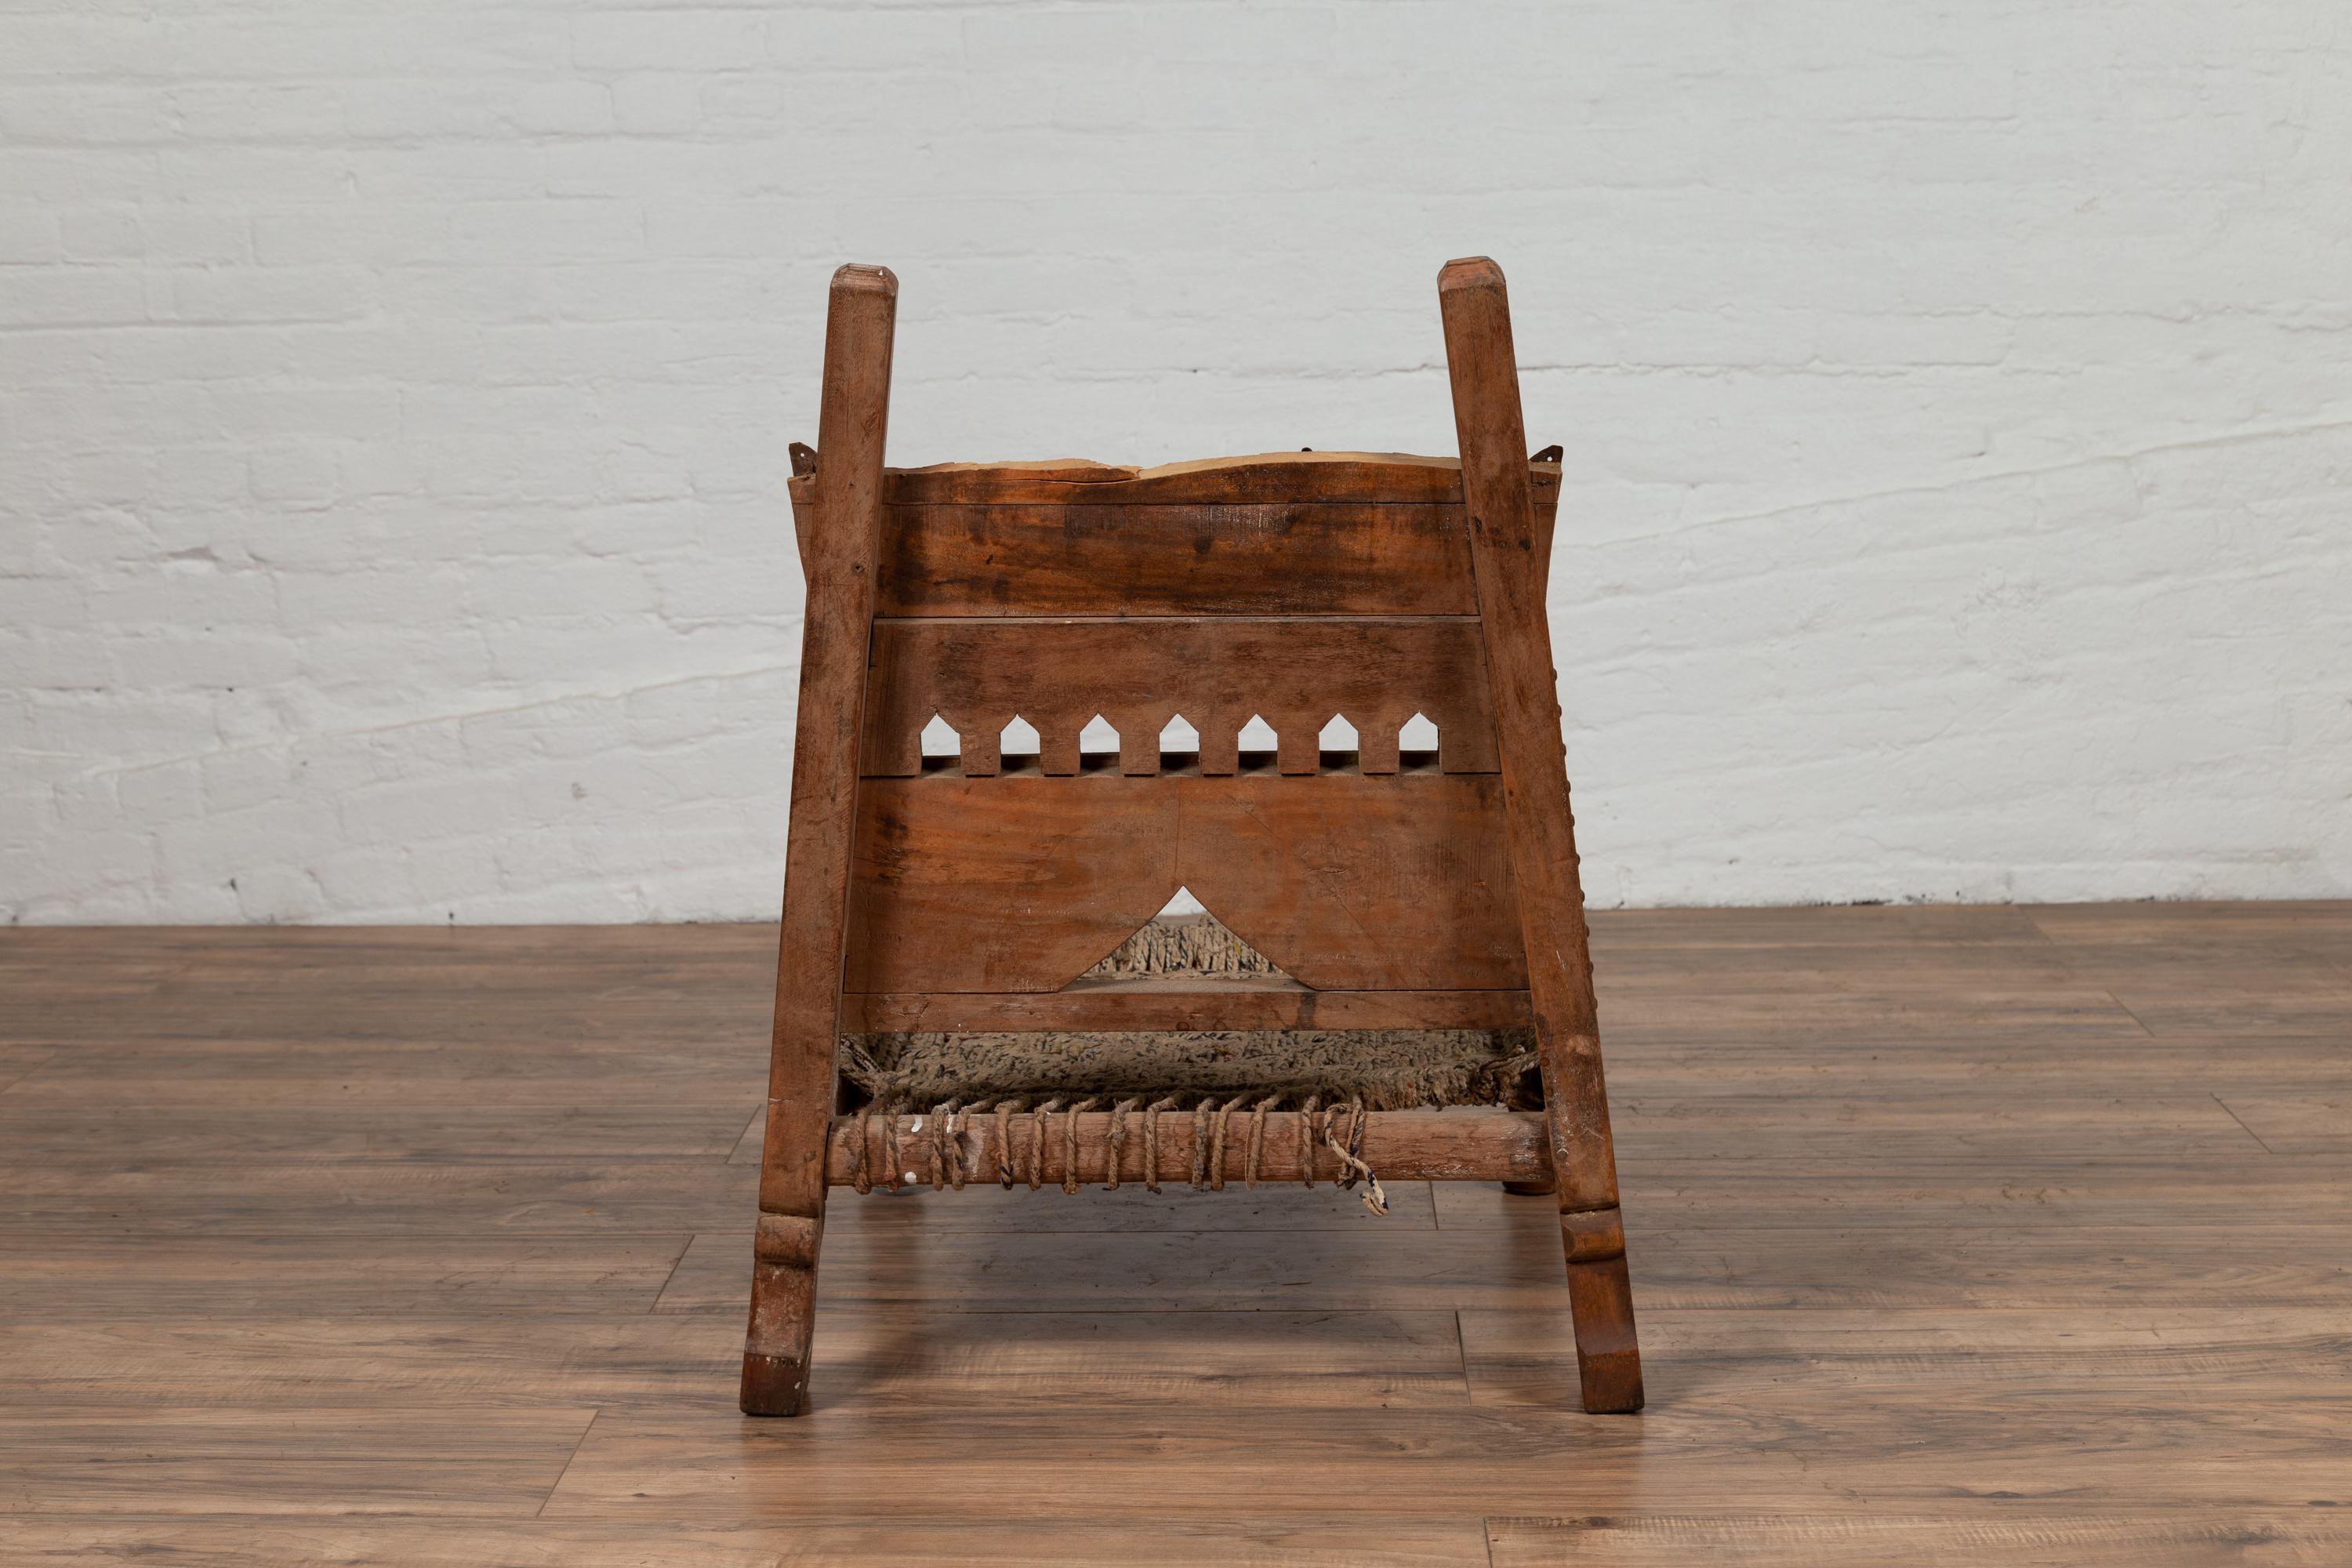 Rustic Indian Low Wooden Chair with Rope Seat and Weathered Appearance For Sale 6